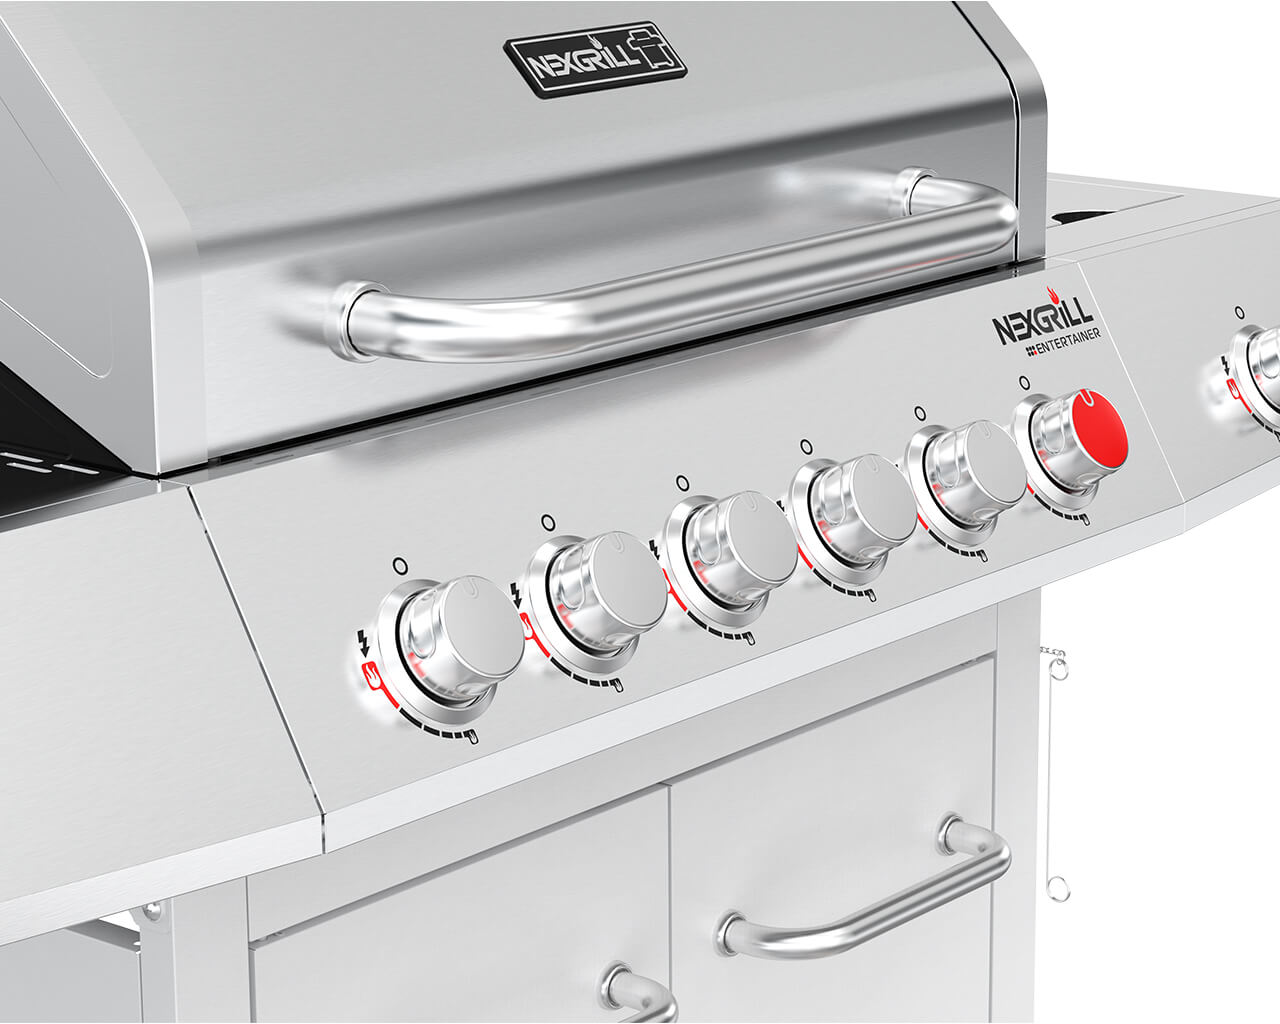 Nexgrill Entertainer 6 Burner BBQ with Sear Zone and Side Burner, , hi-res image number null